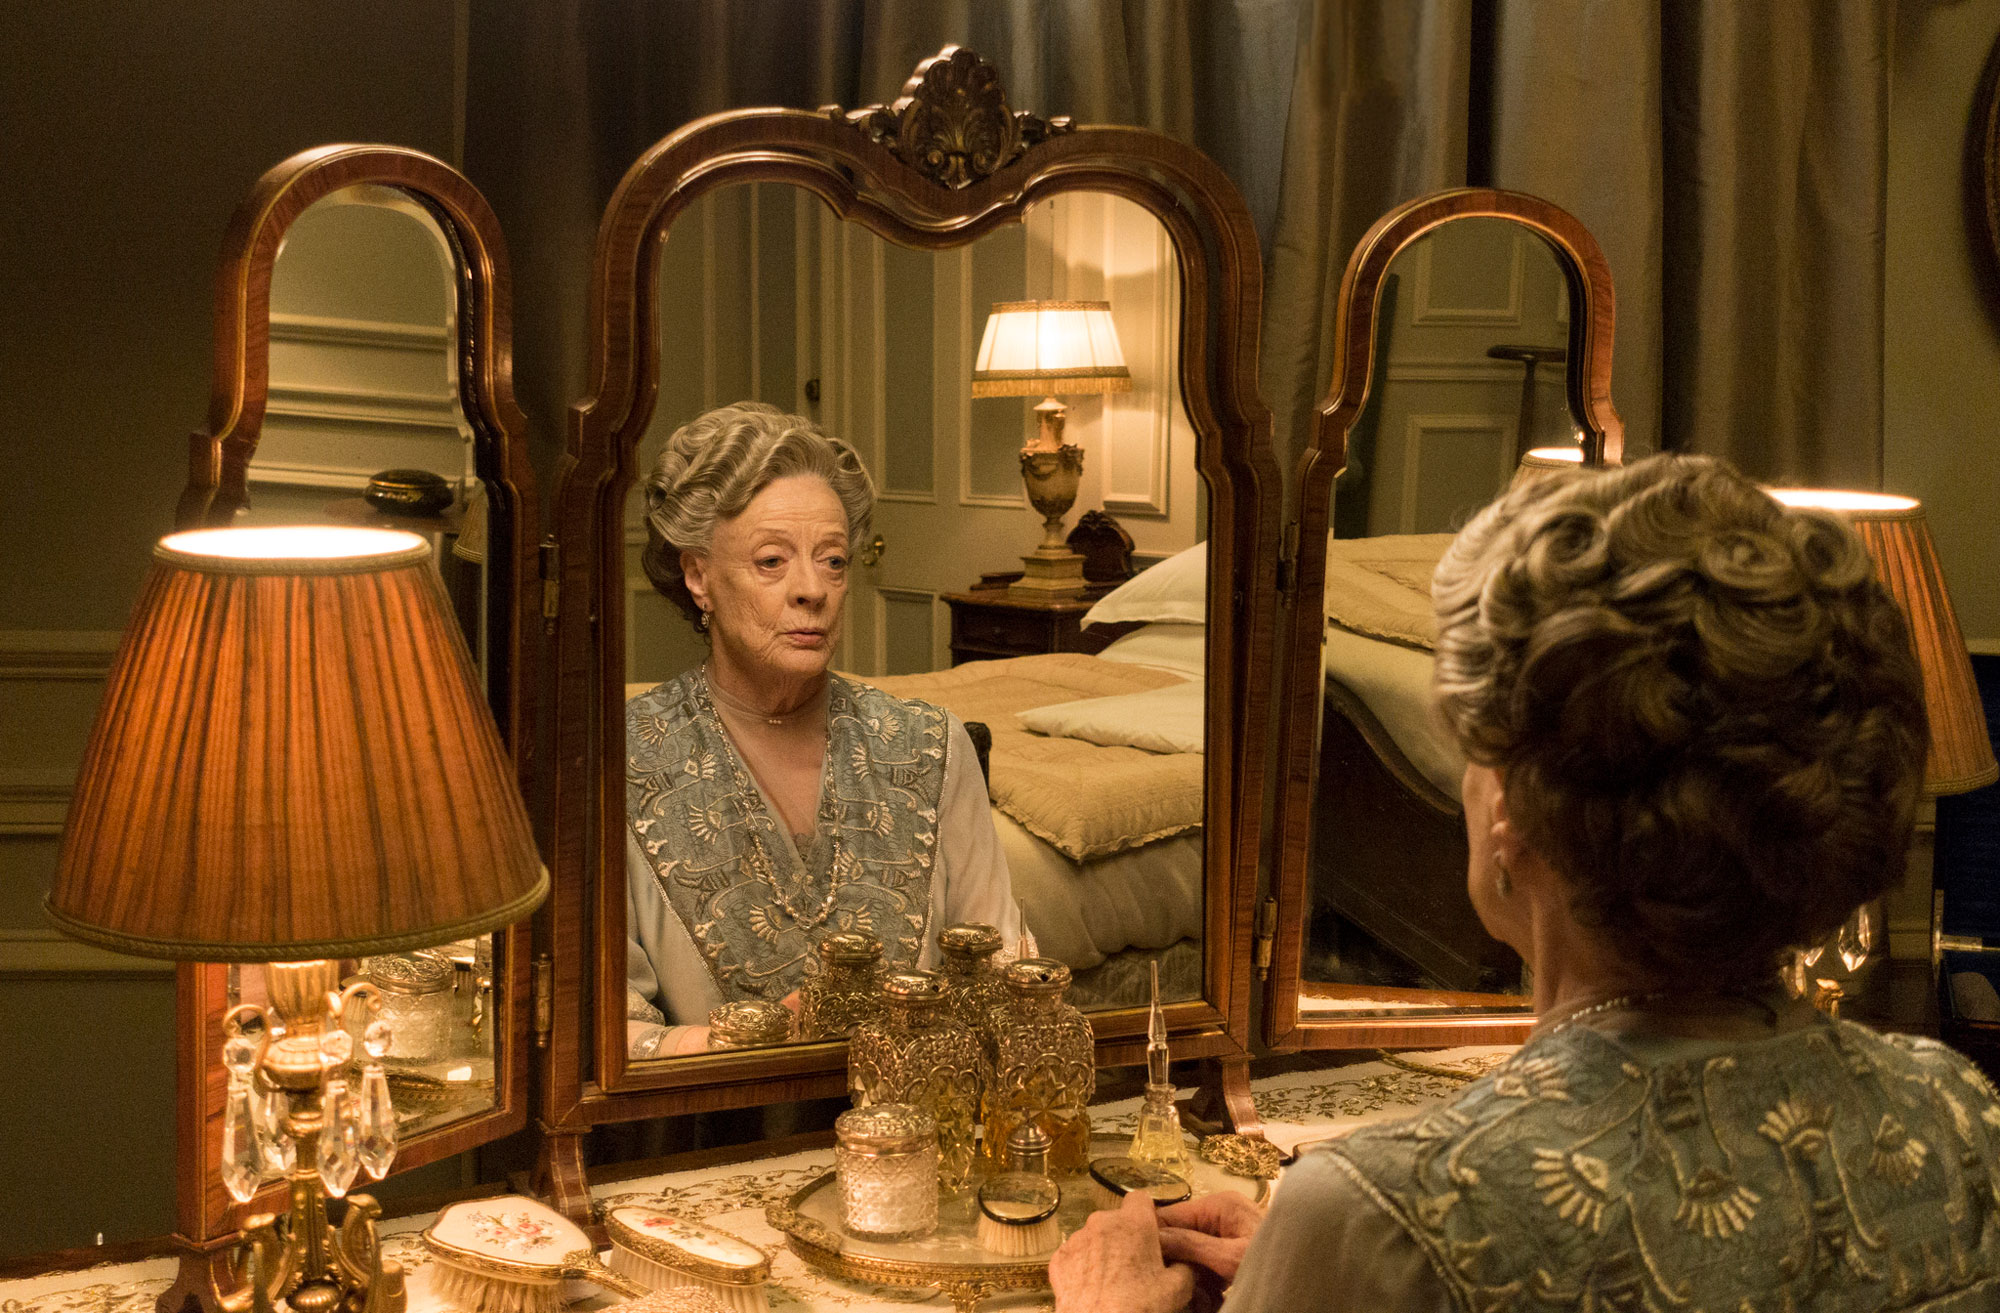 still from Downton Abbey Series, Maggie Smith playing Violet Crawley